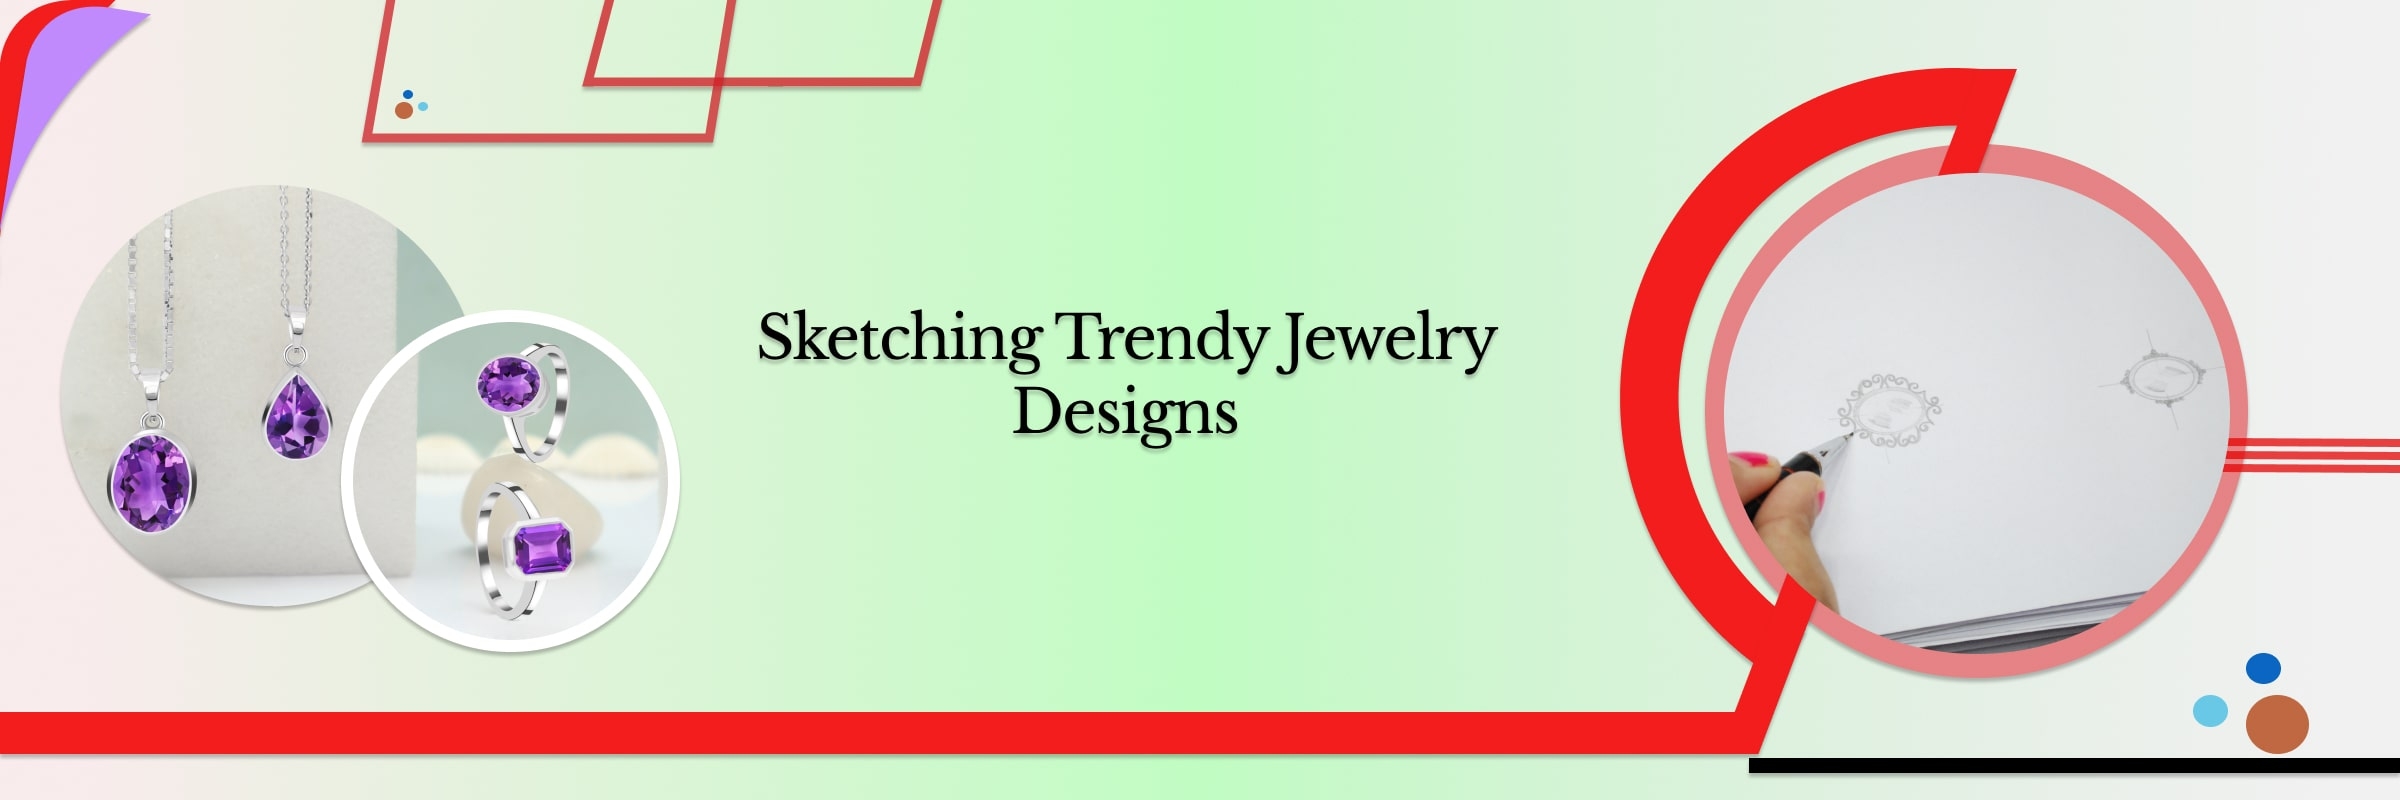 How to Create Sketches of Jewelry Designs